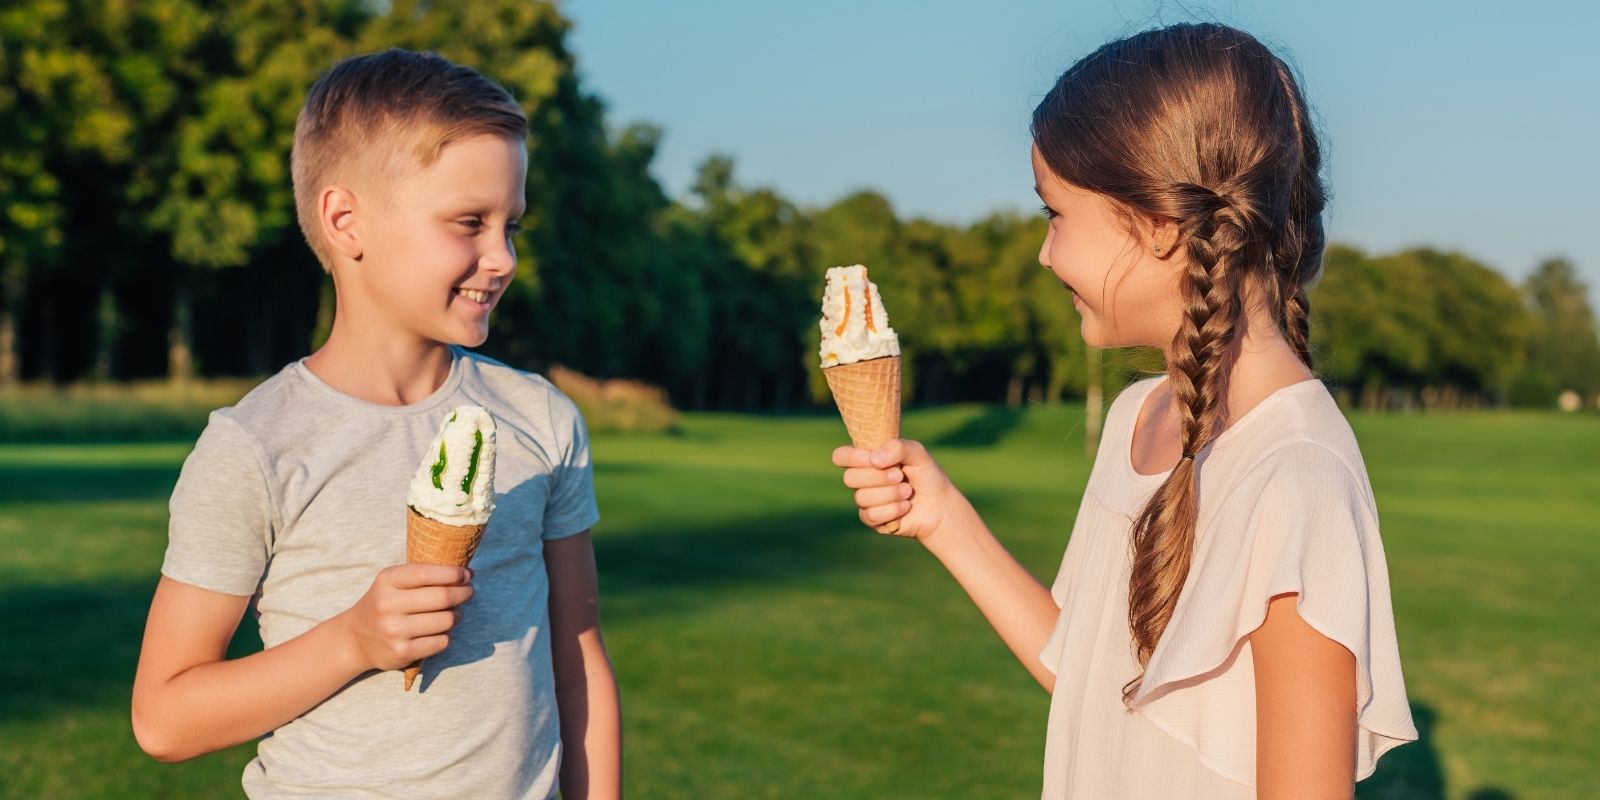 Two smiling children eating ice cream at a park.